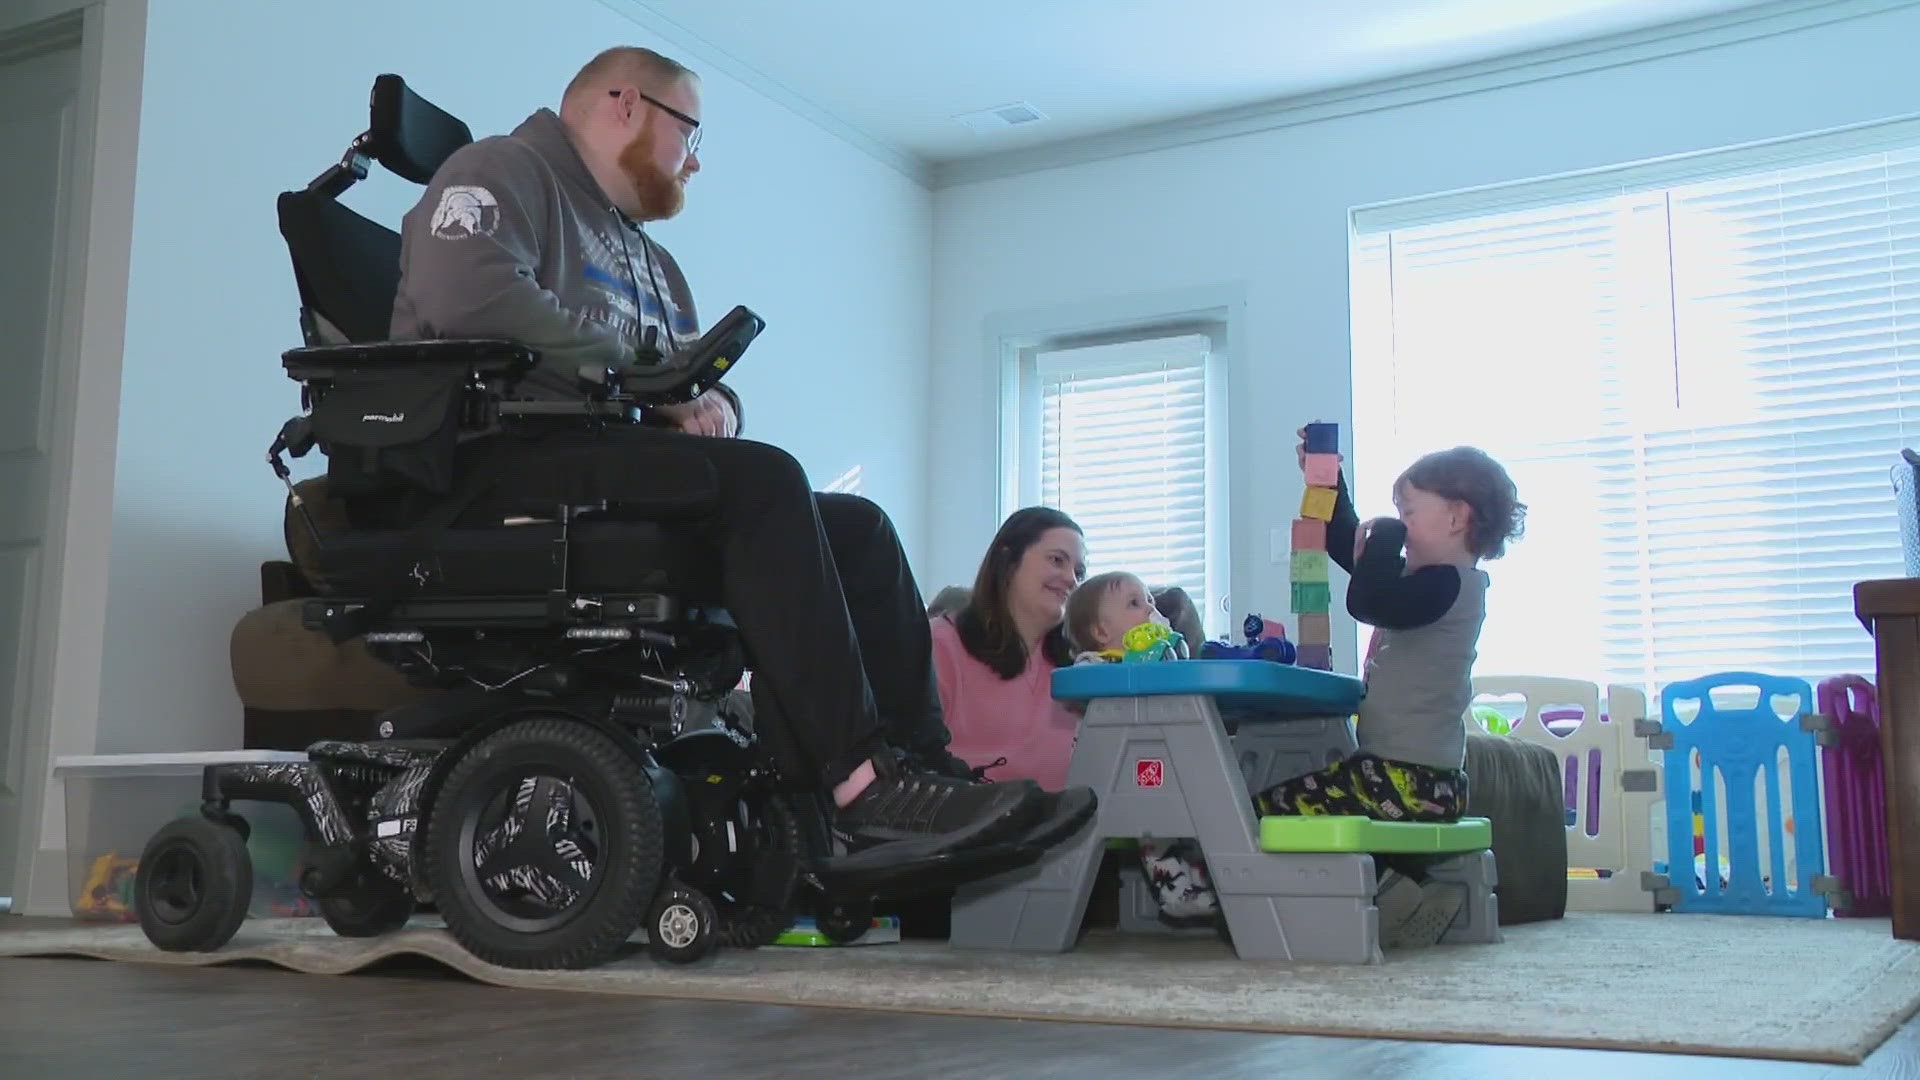 Uplift Johnson County is giving $12,00 to the family of officer Dustin Moody as they rebuild their lives following his injury in the line-of-duty.